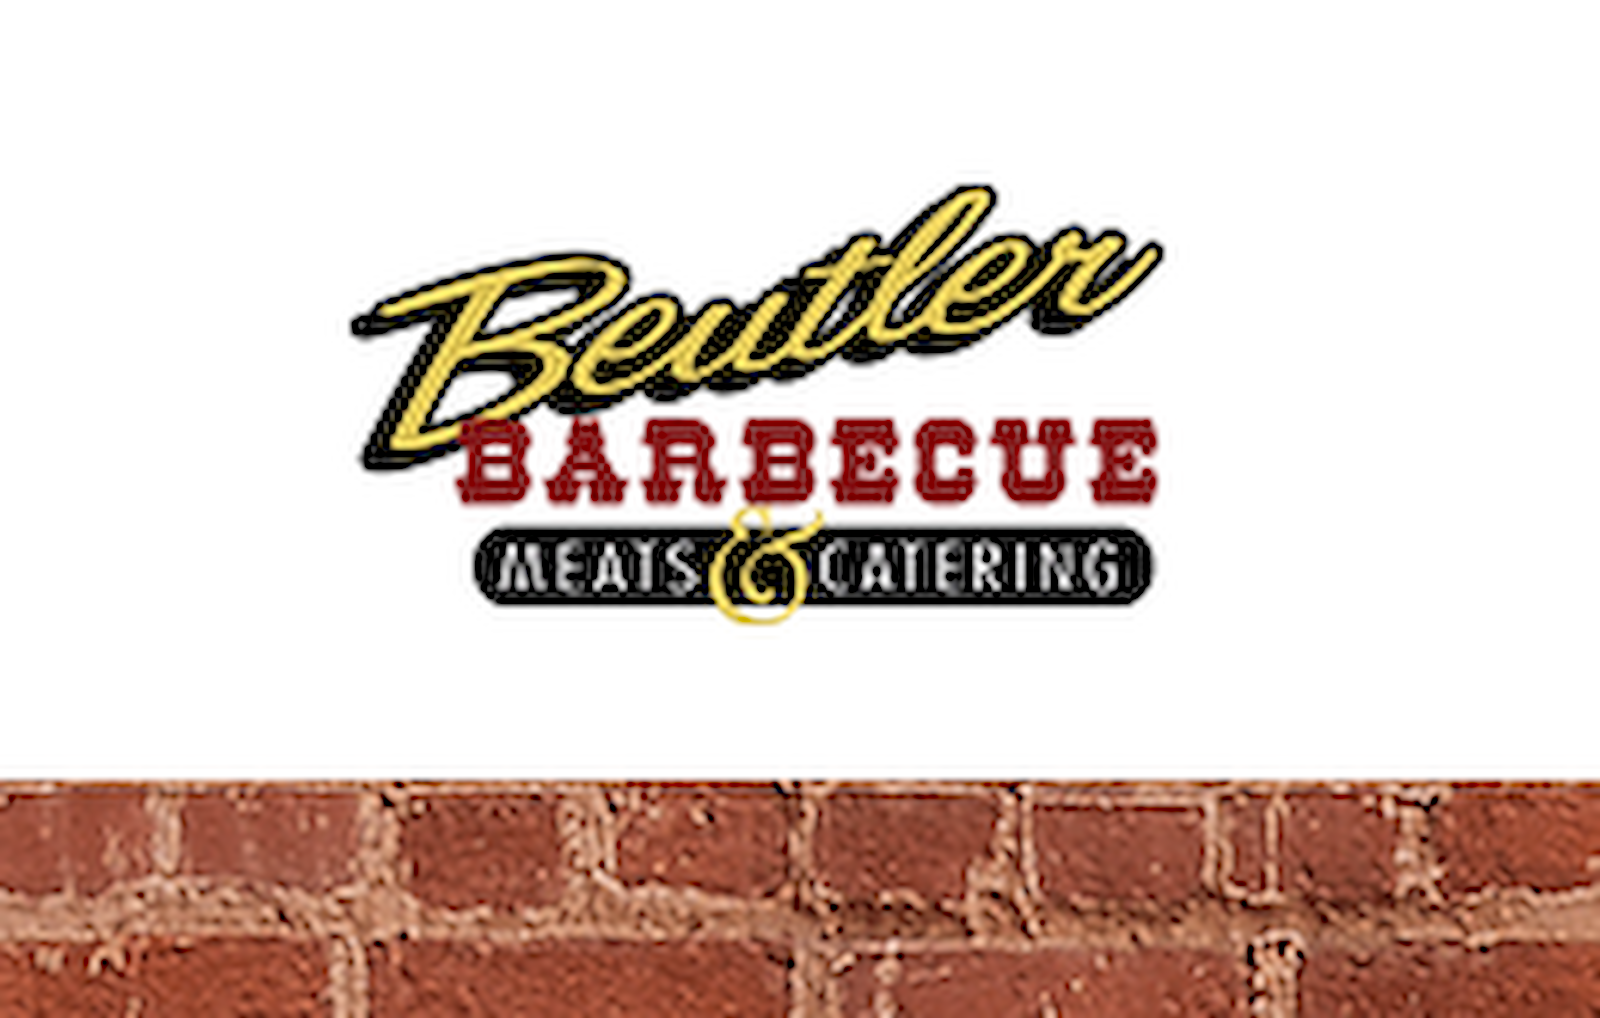 Beutler Meat Processing, Inc.